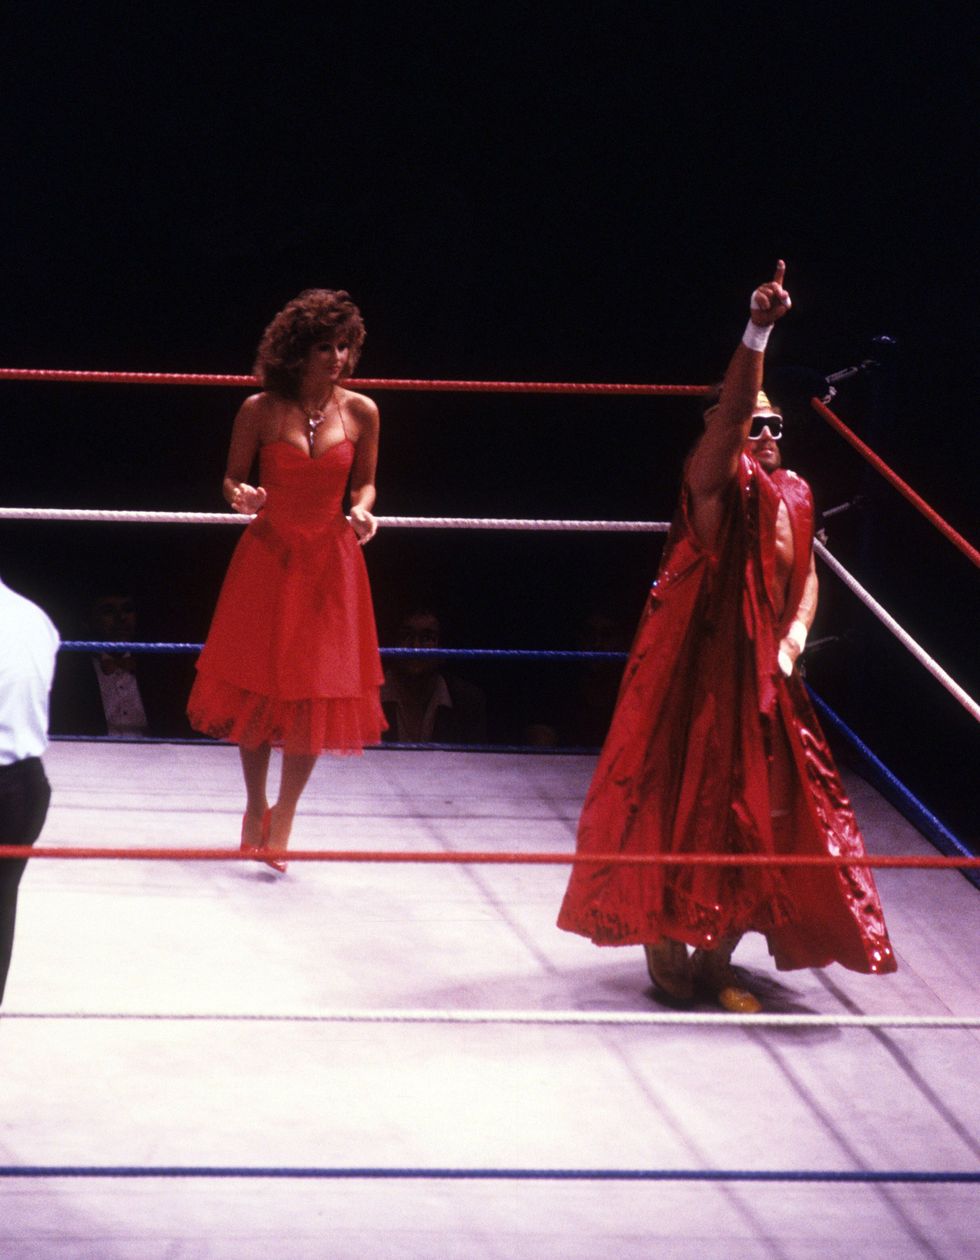 "Macho Man" Randy Savage enters the ring with Miss Elizabeth before a 1987 WWF match against Sika at Madison Square Garden in New York City